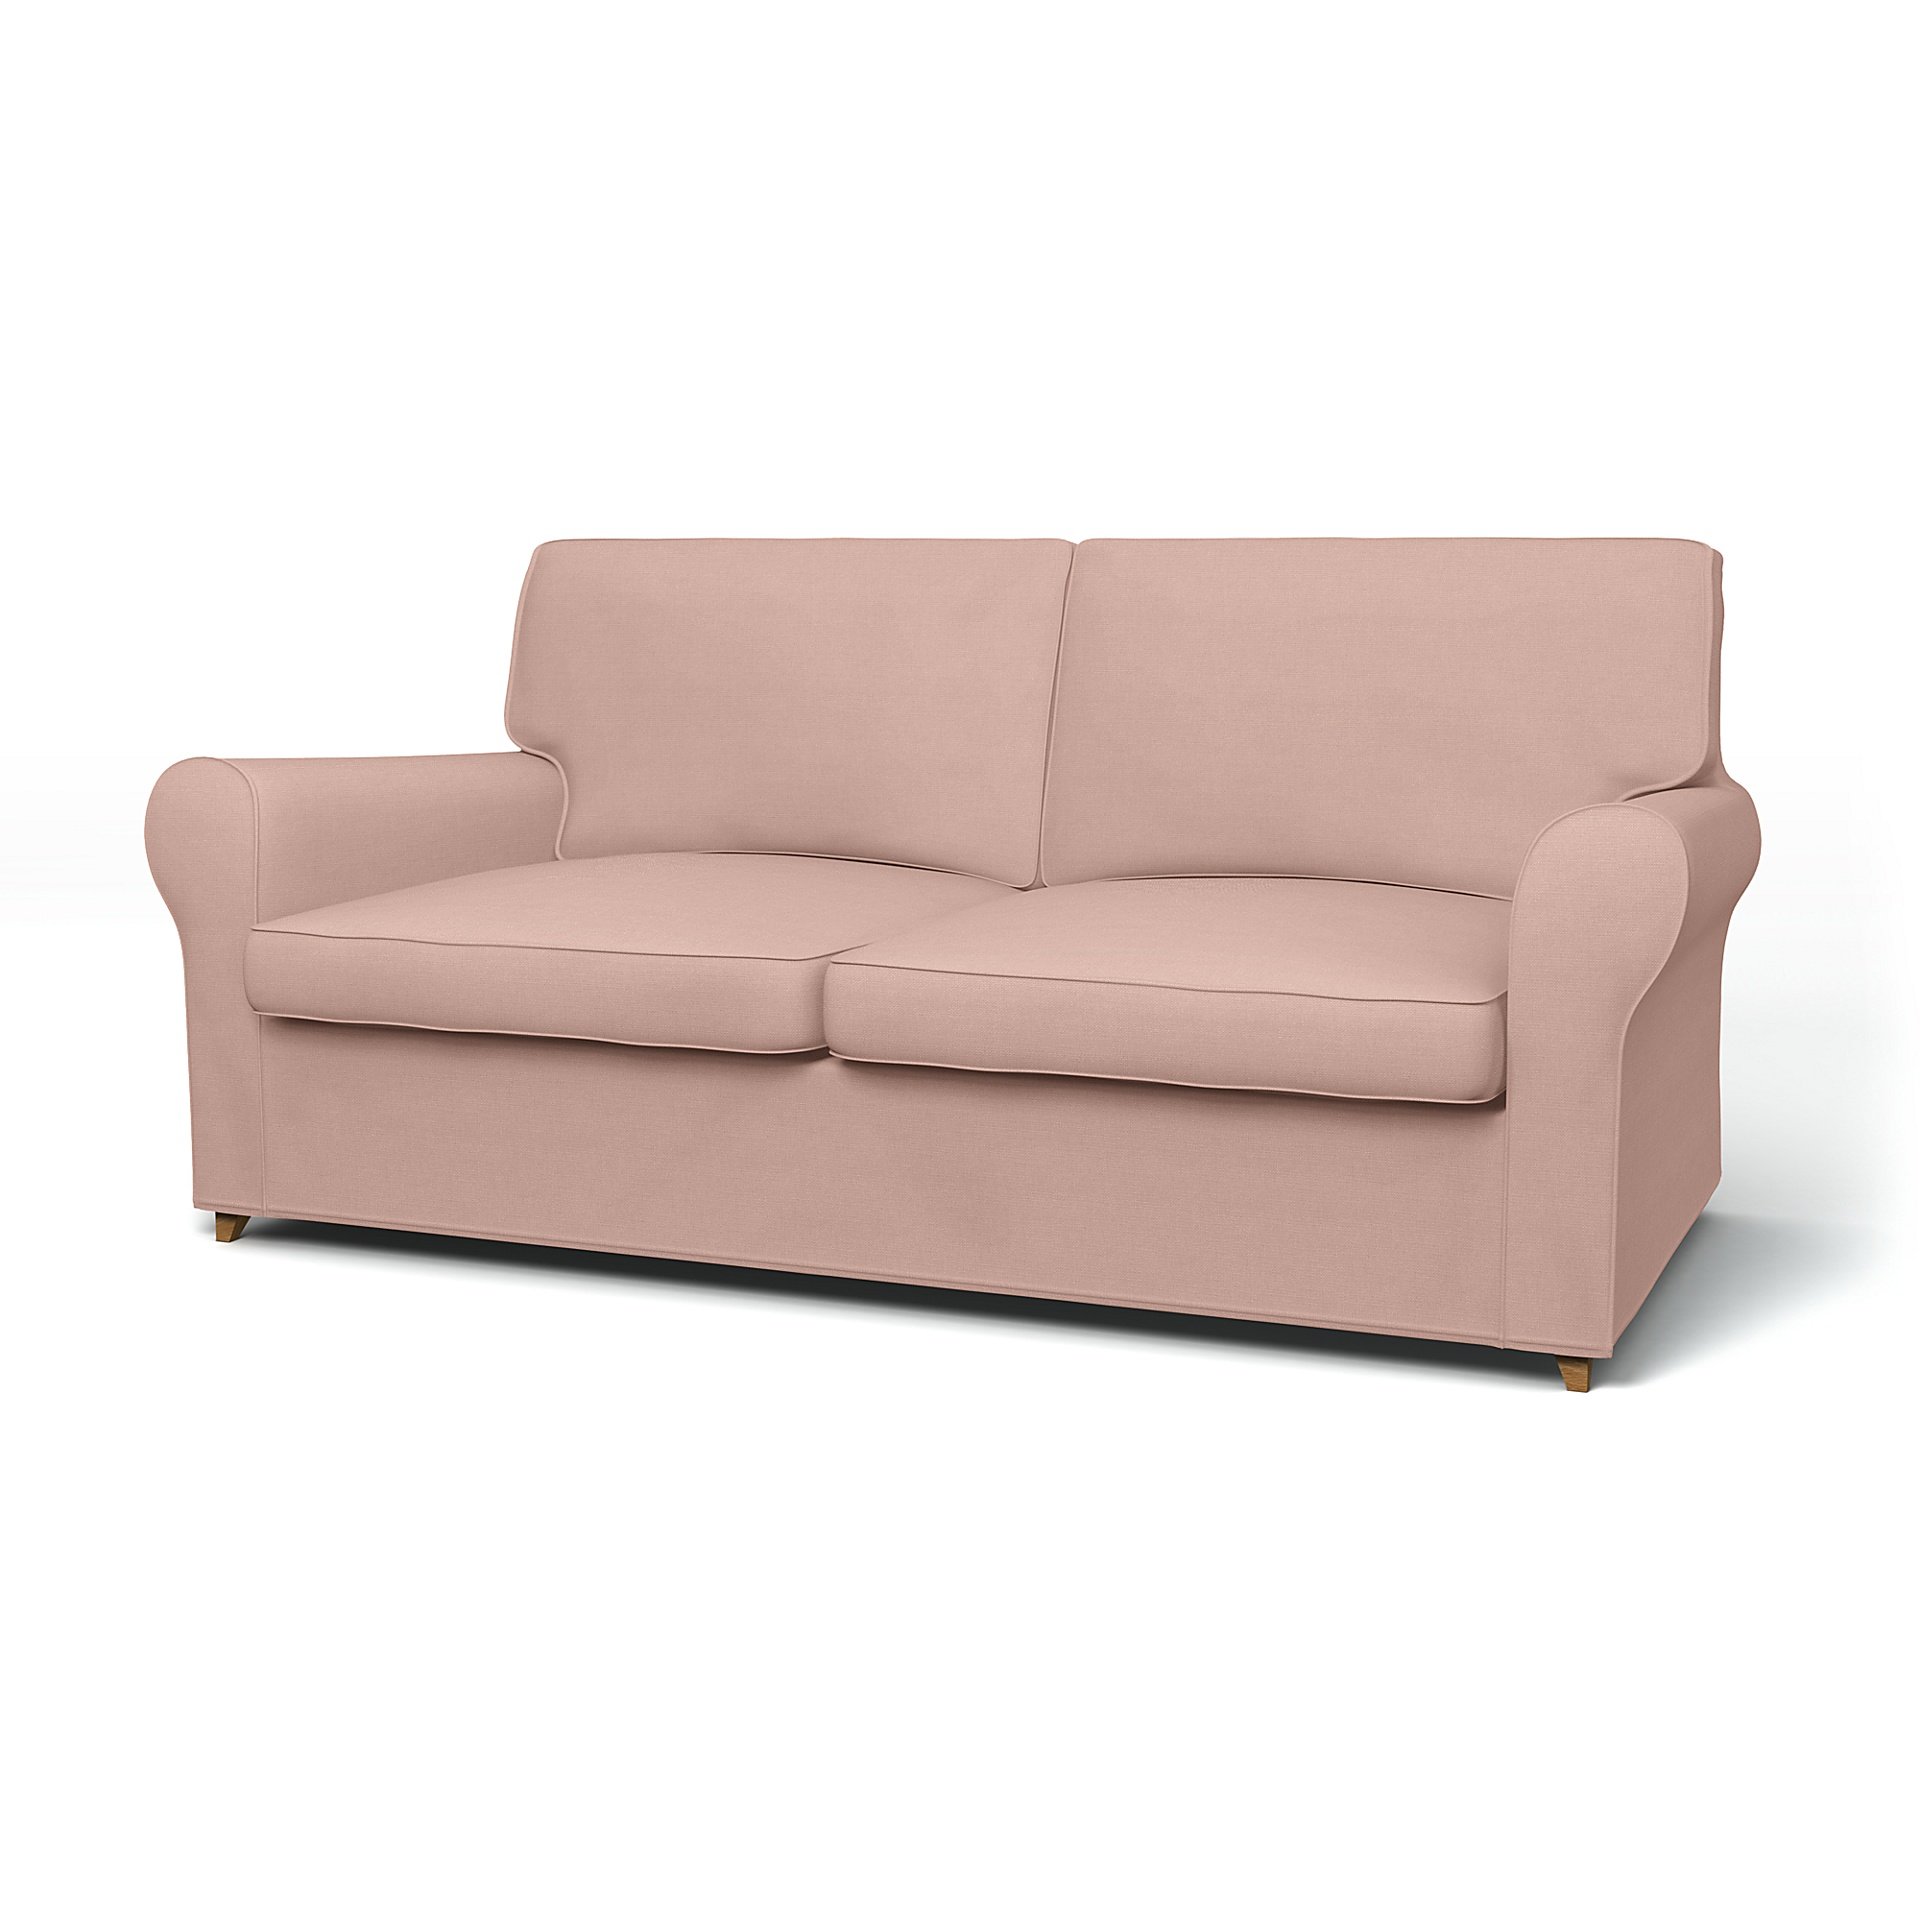 IKEA - Angby Sofa Bed Cover, Blush, Linen - Bemz